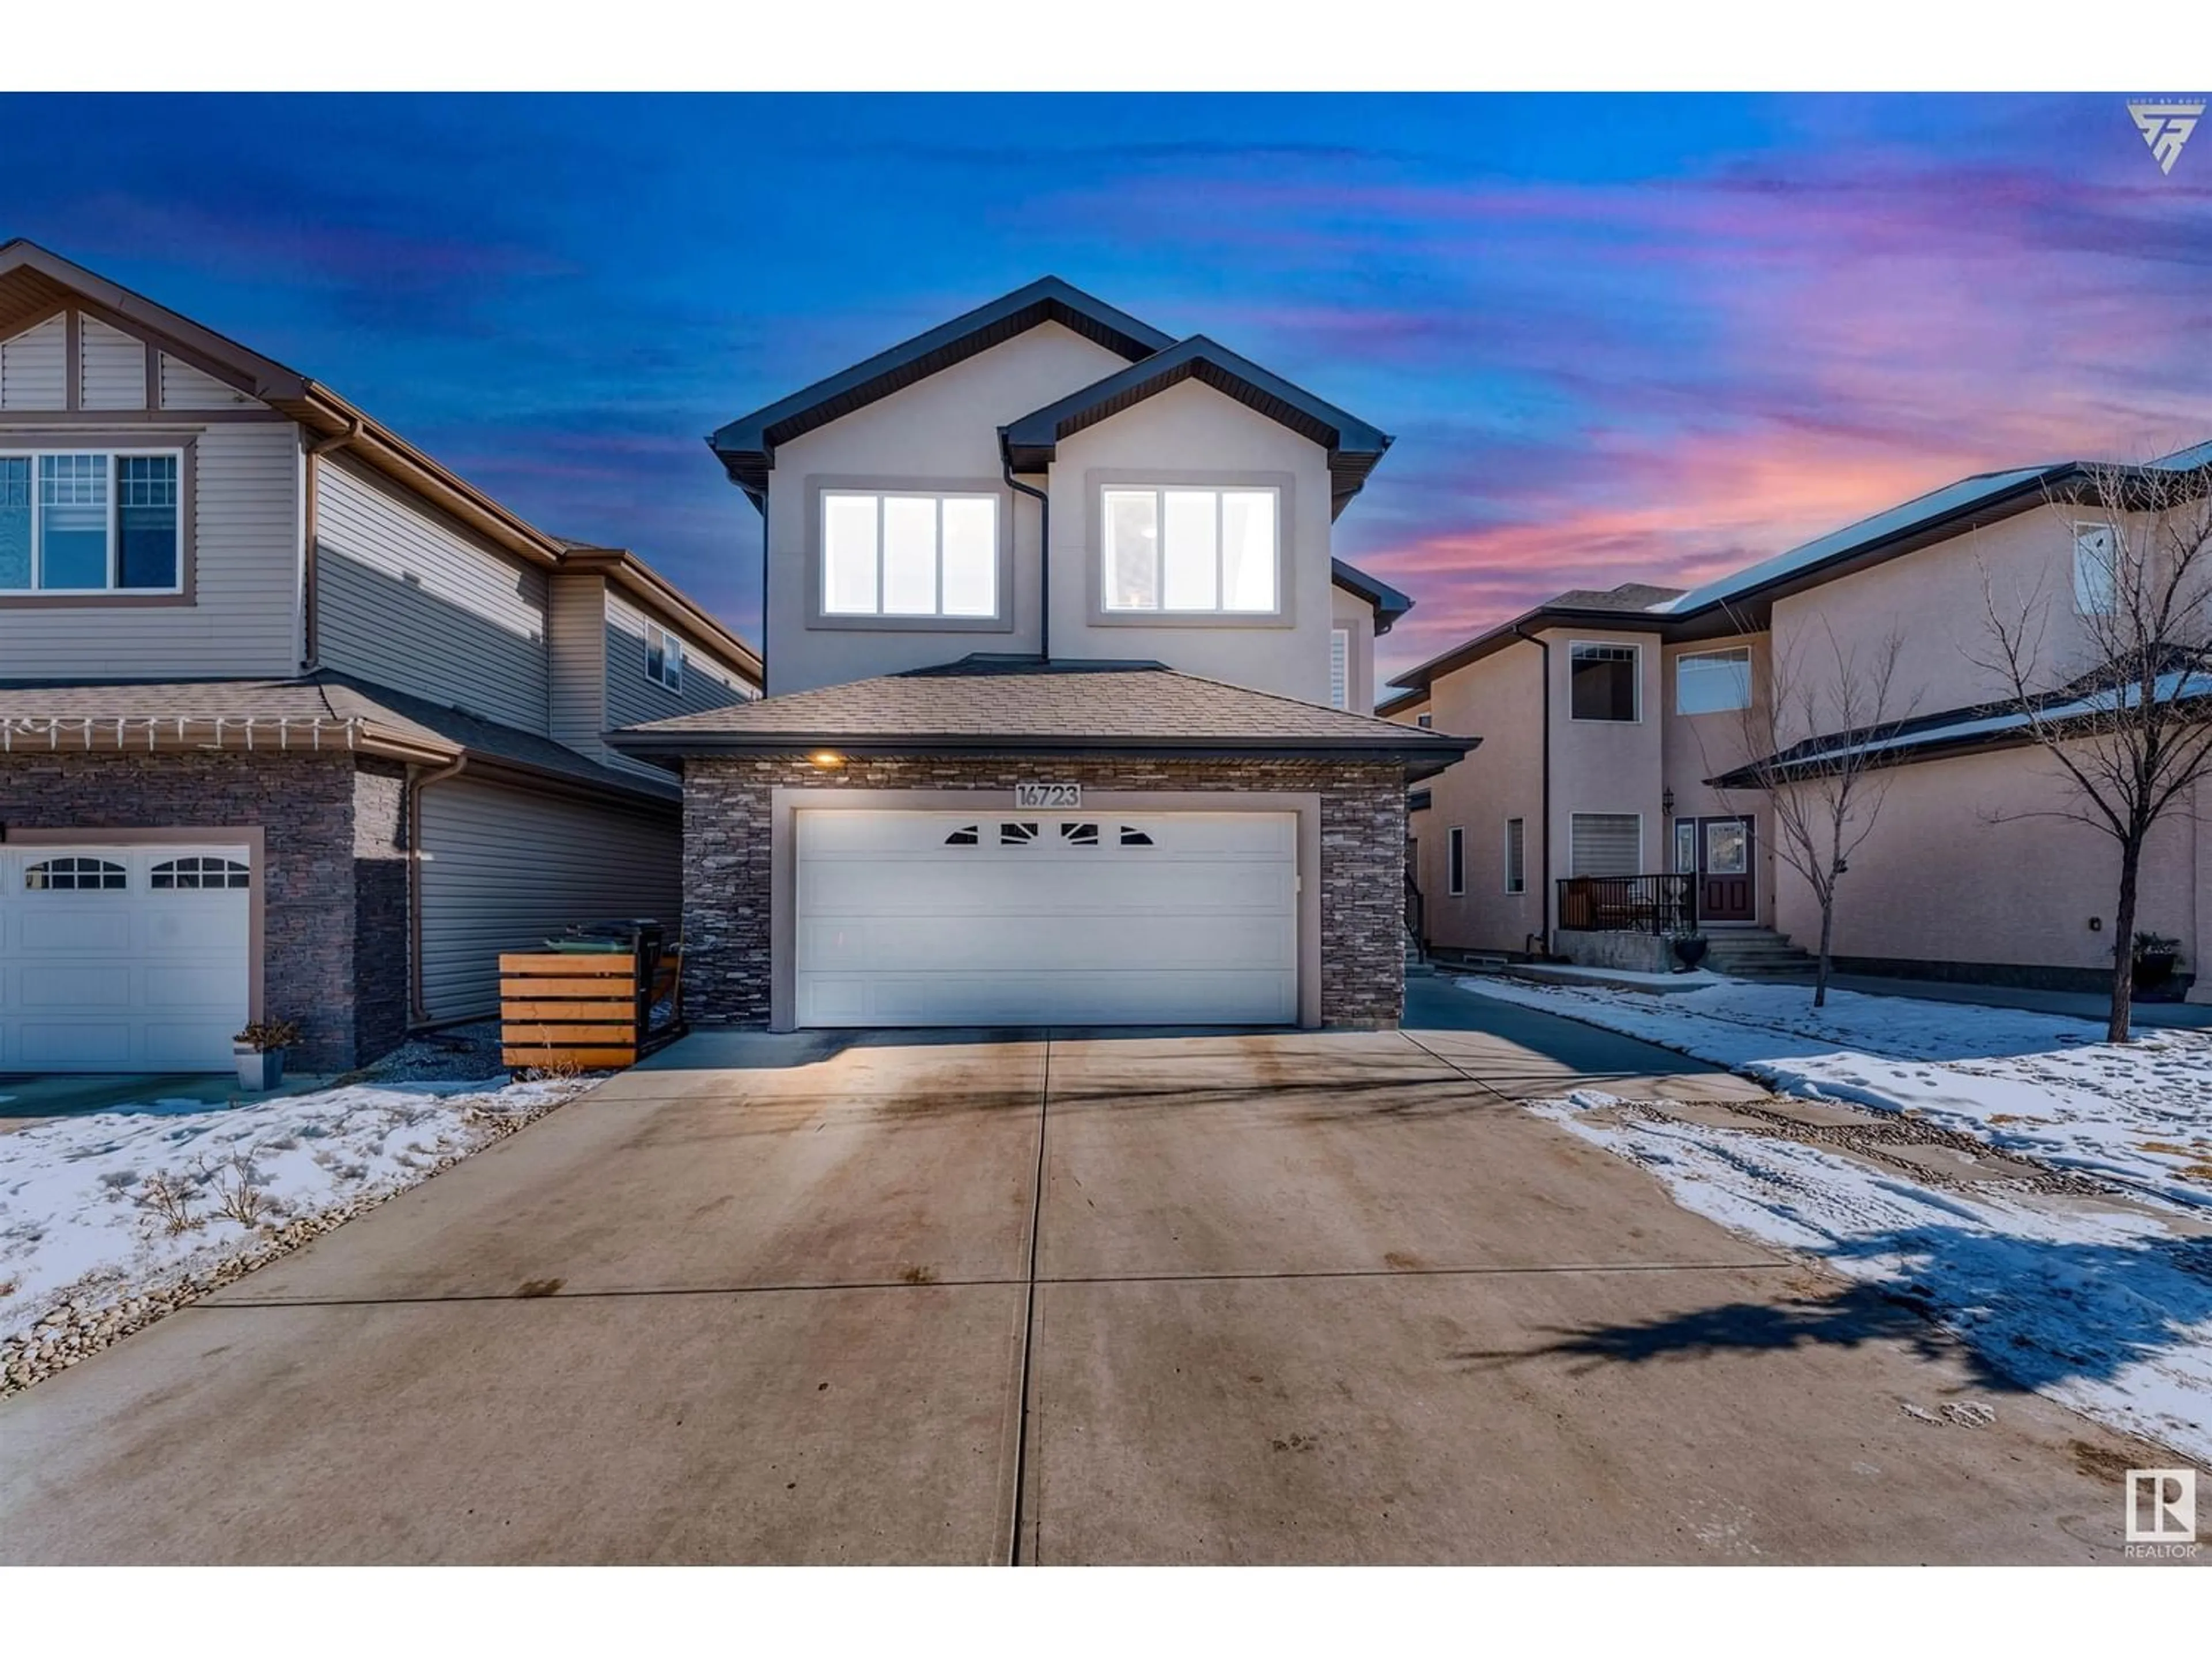 Frontside or backside of a home for 16723 61 ST NW, Edmonton Alberta T5Y0W6